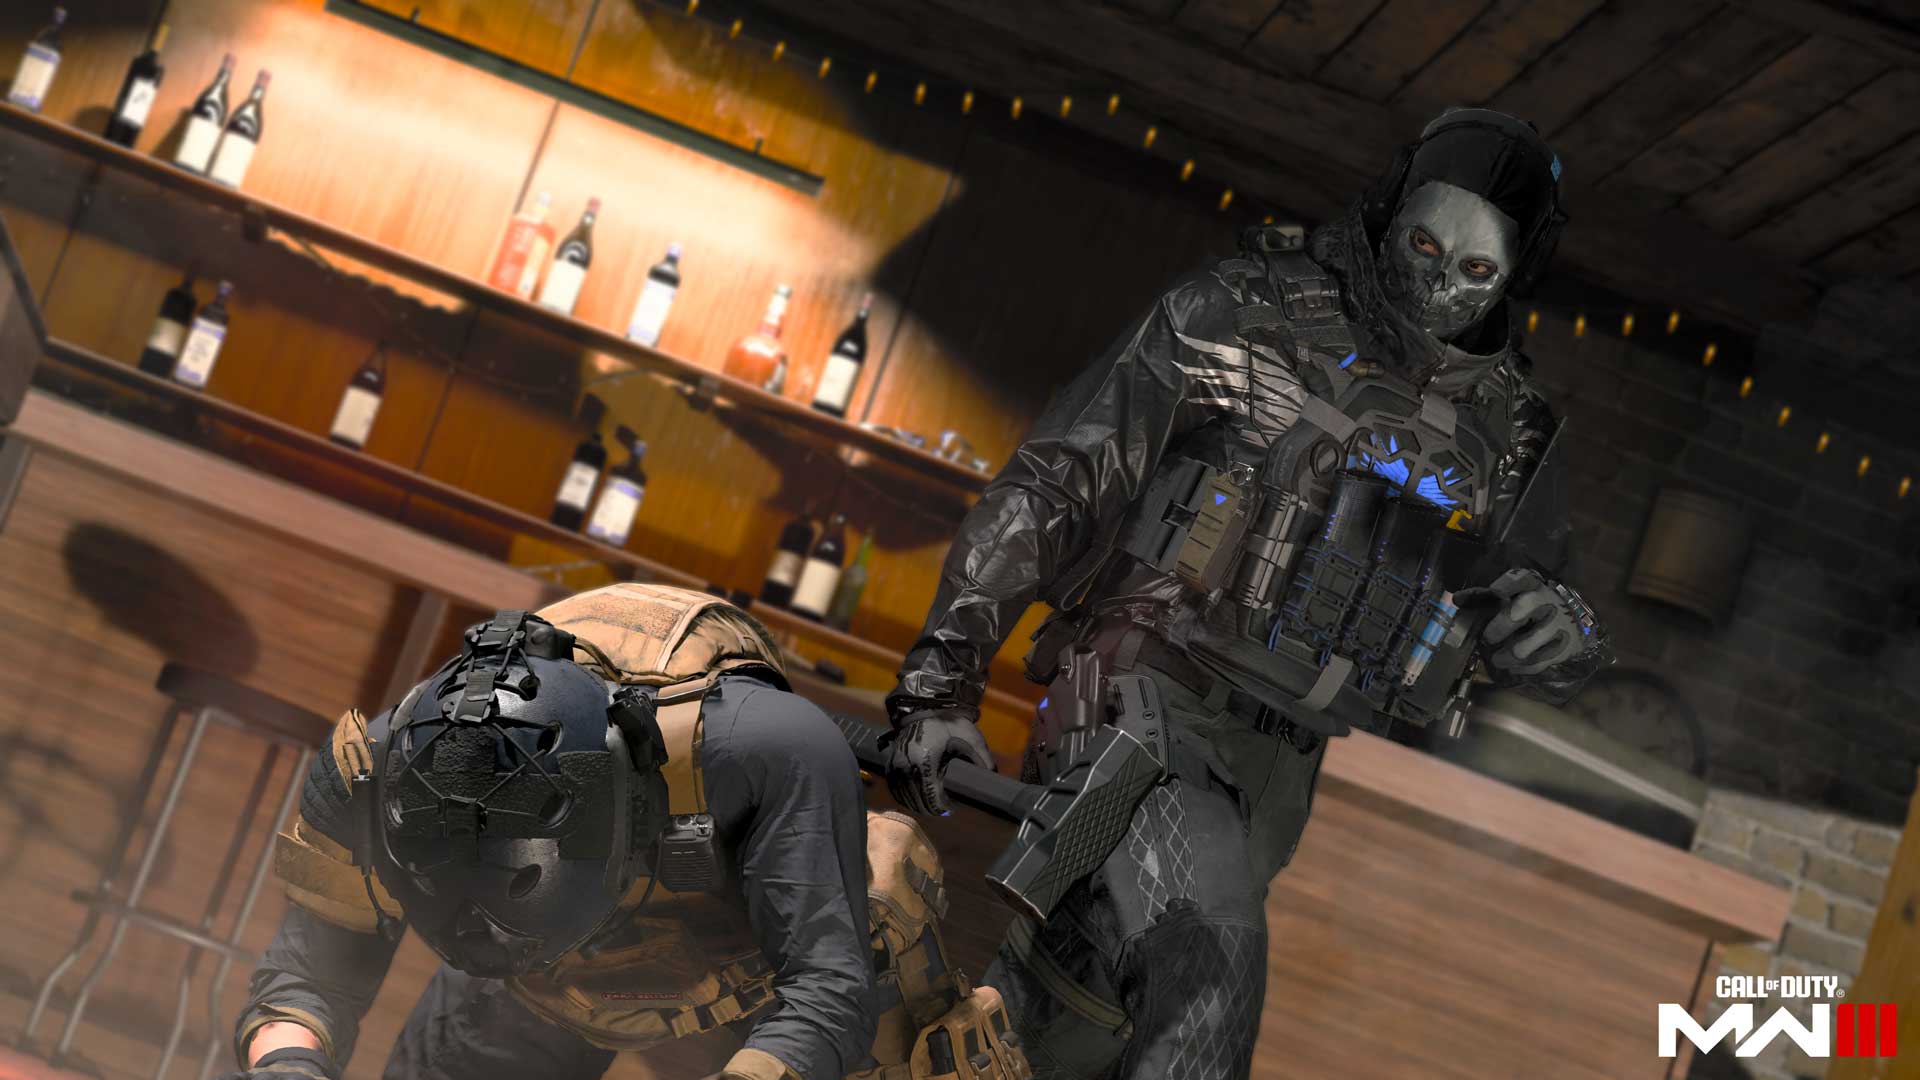 Call of Duty Dev Discusses the Reasons Why Advanced Warfare 2 Was Canceled